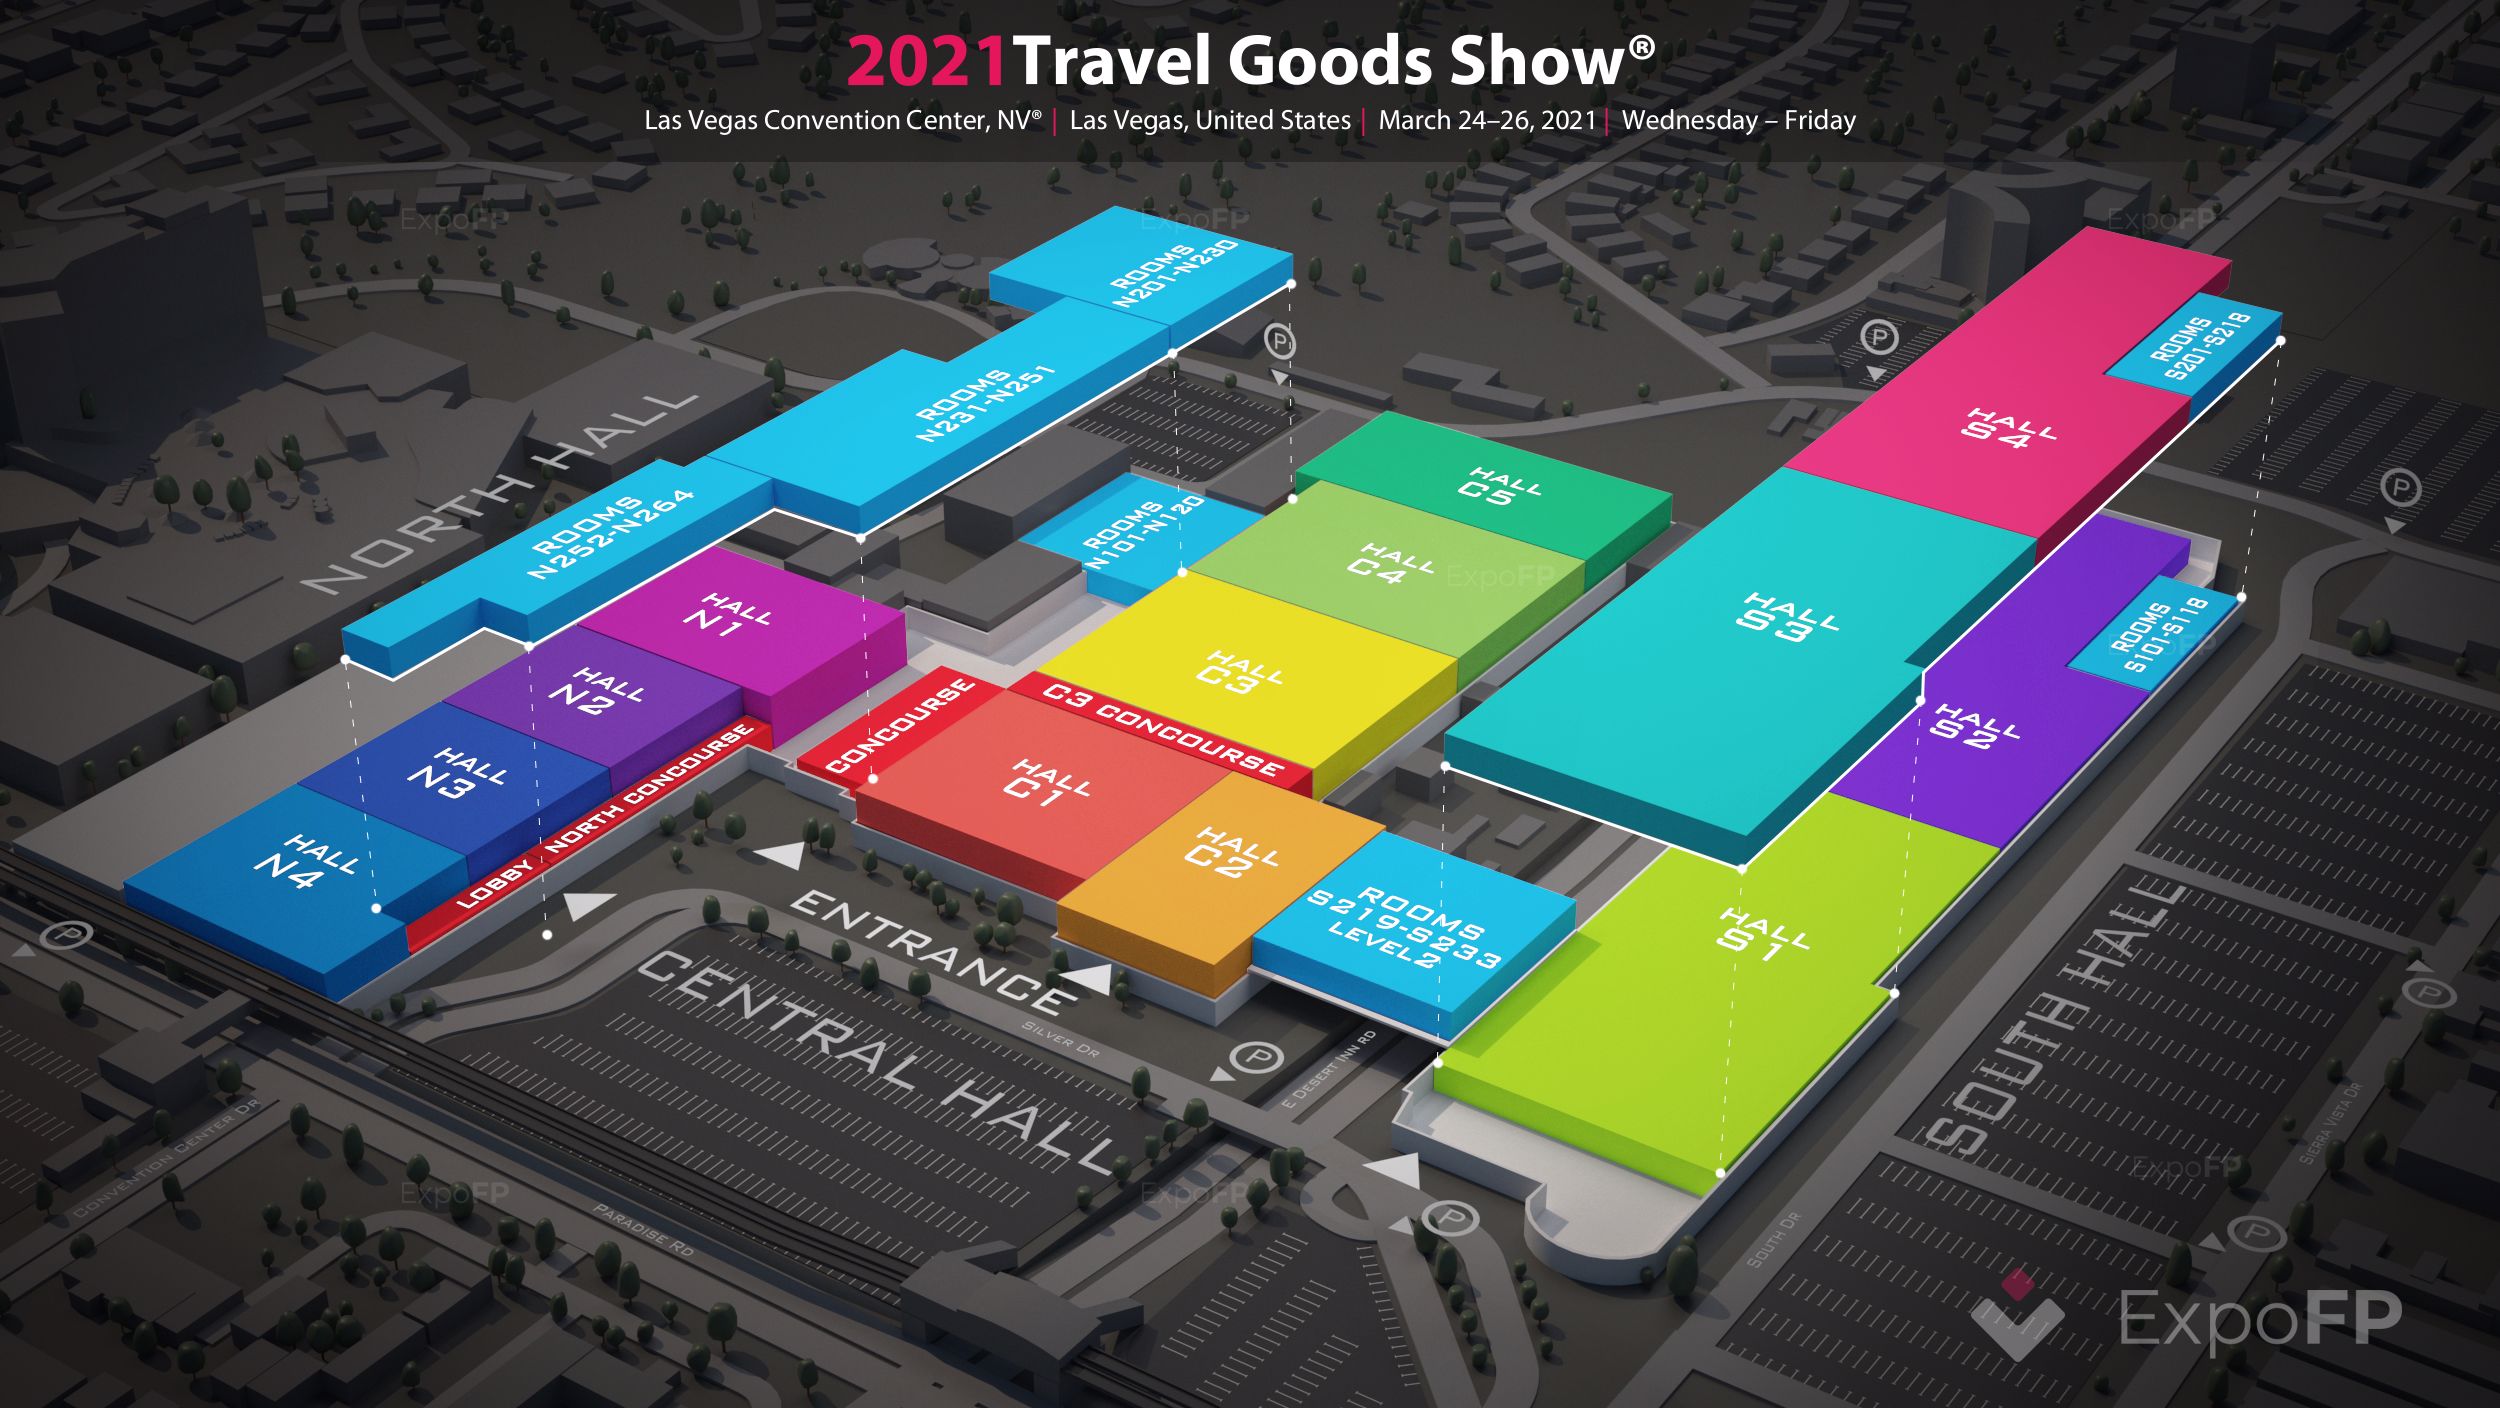 Travel Goods Show 2021 in Las Vegas Convention Center, NV